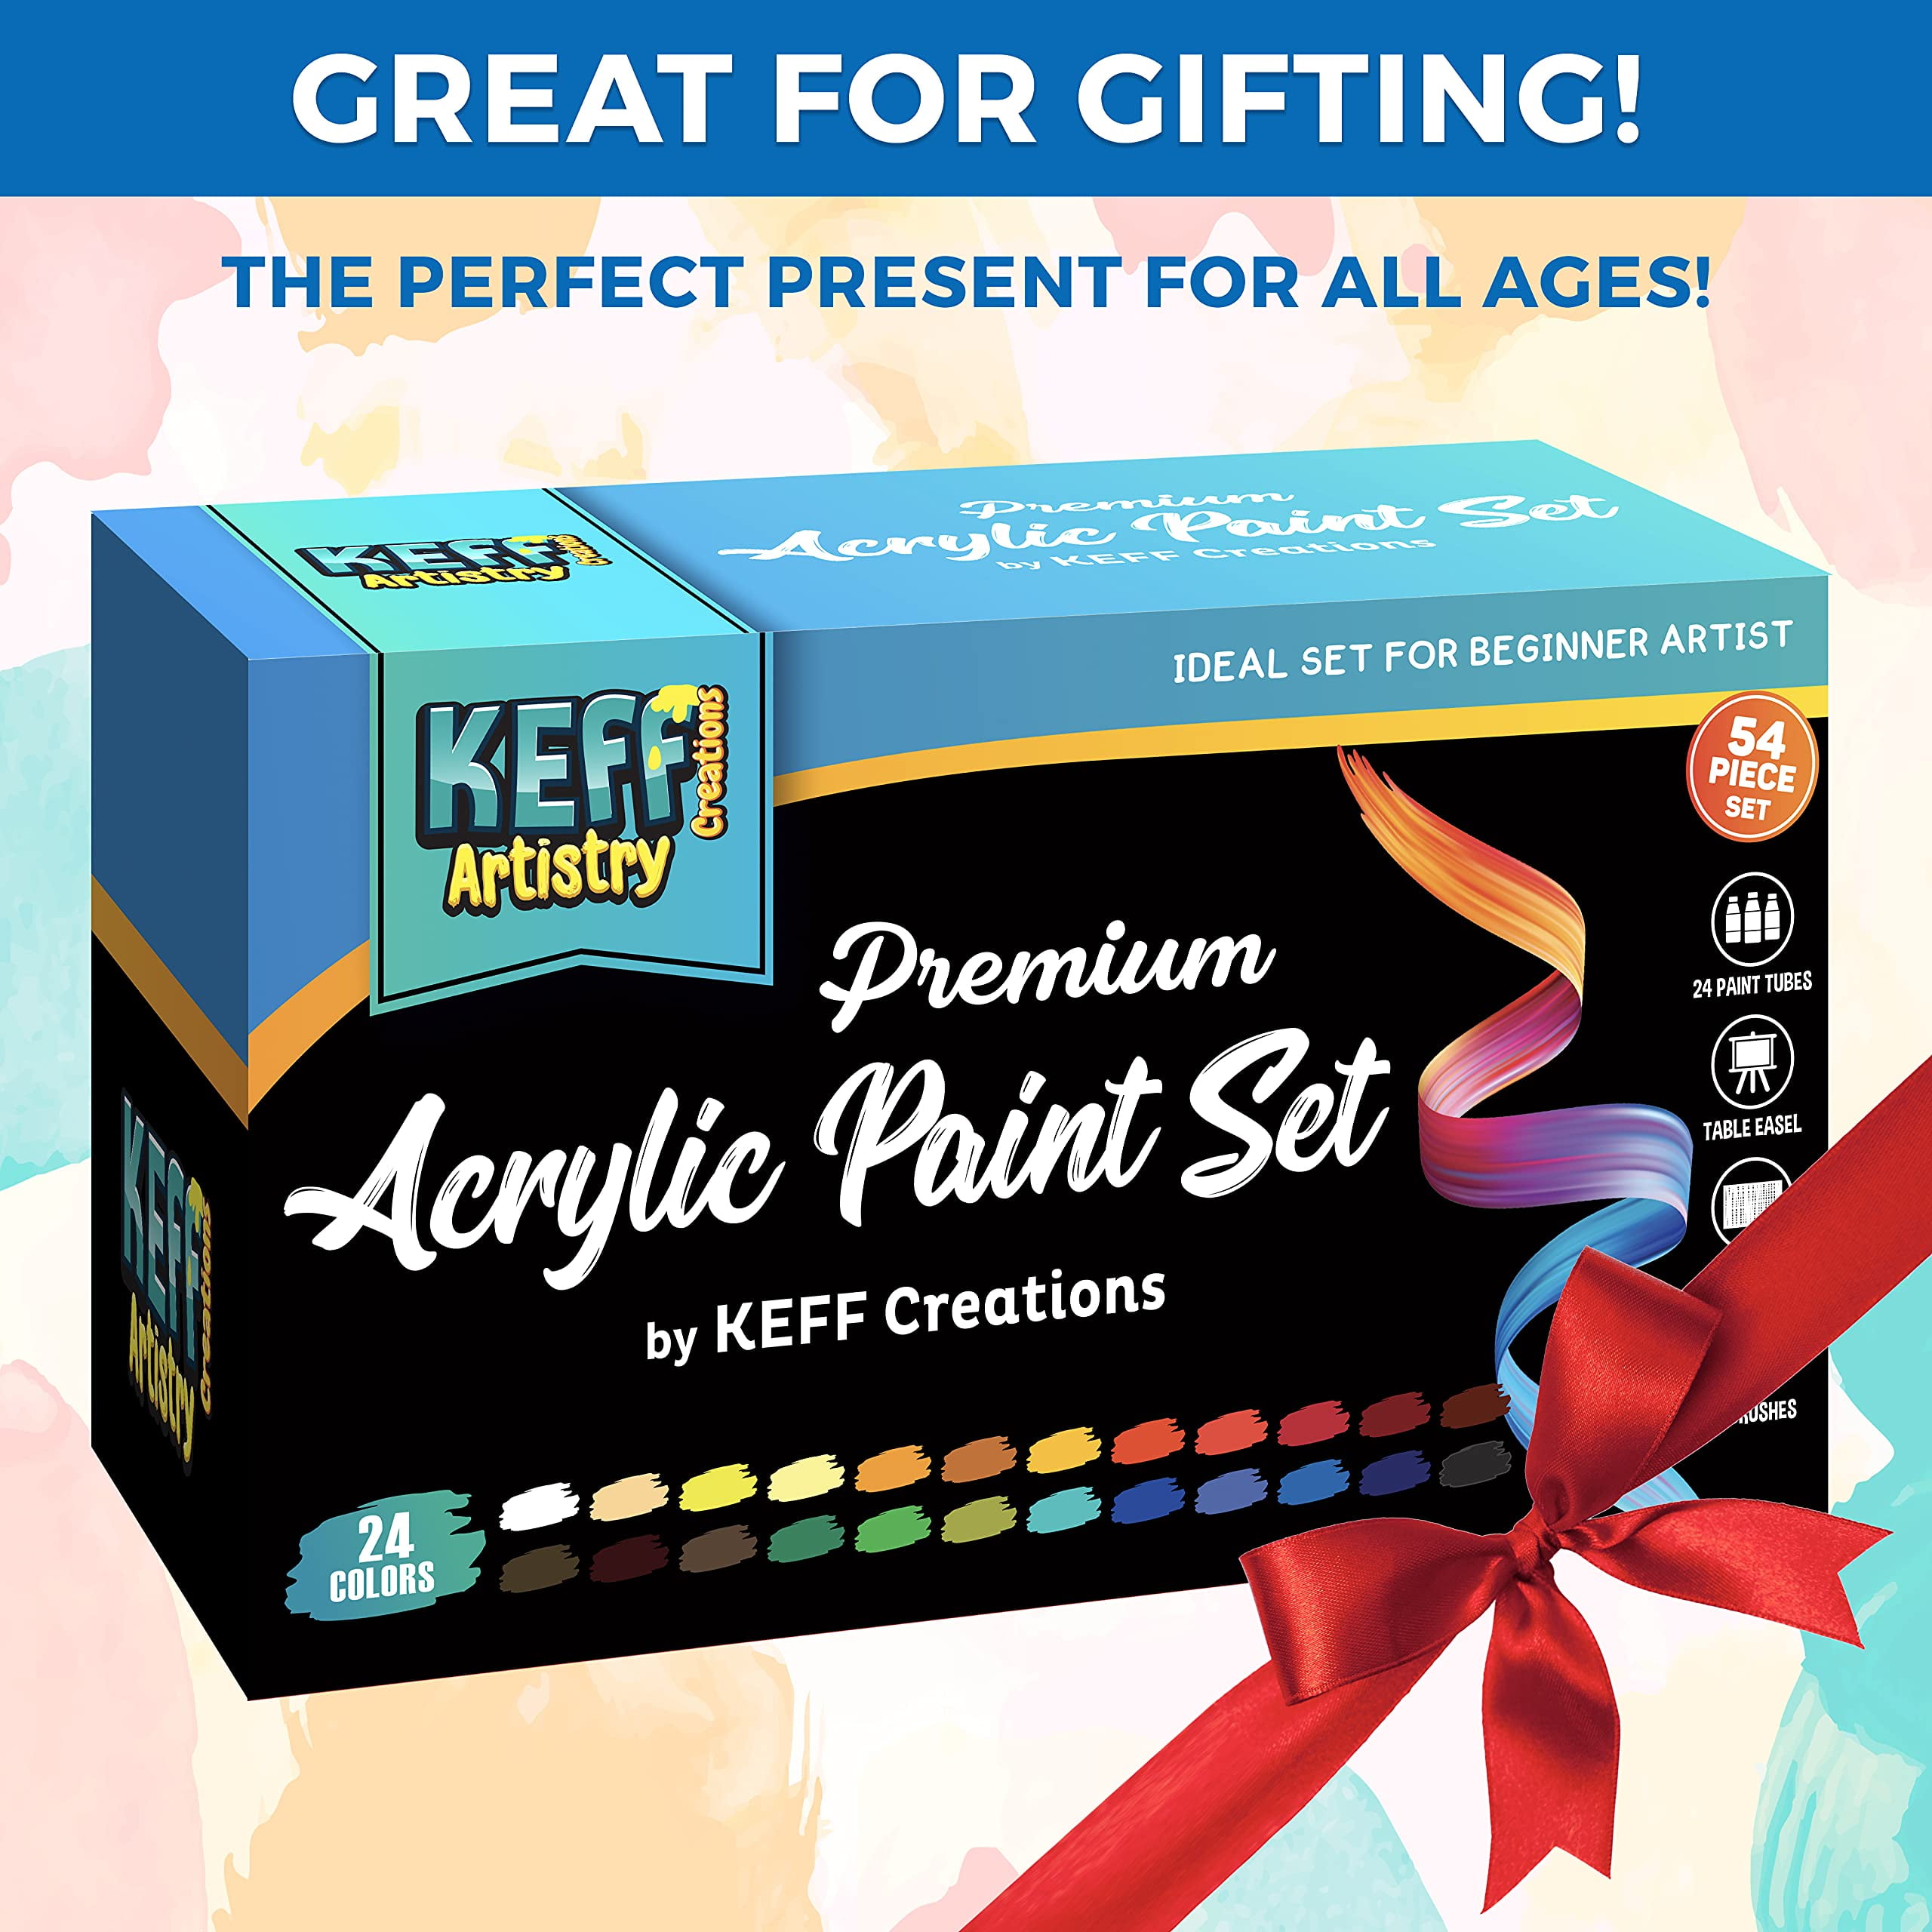 KEFF Painting Kit Supplies - Acrylic Paint Set for Adults and Kids with  Tabletop